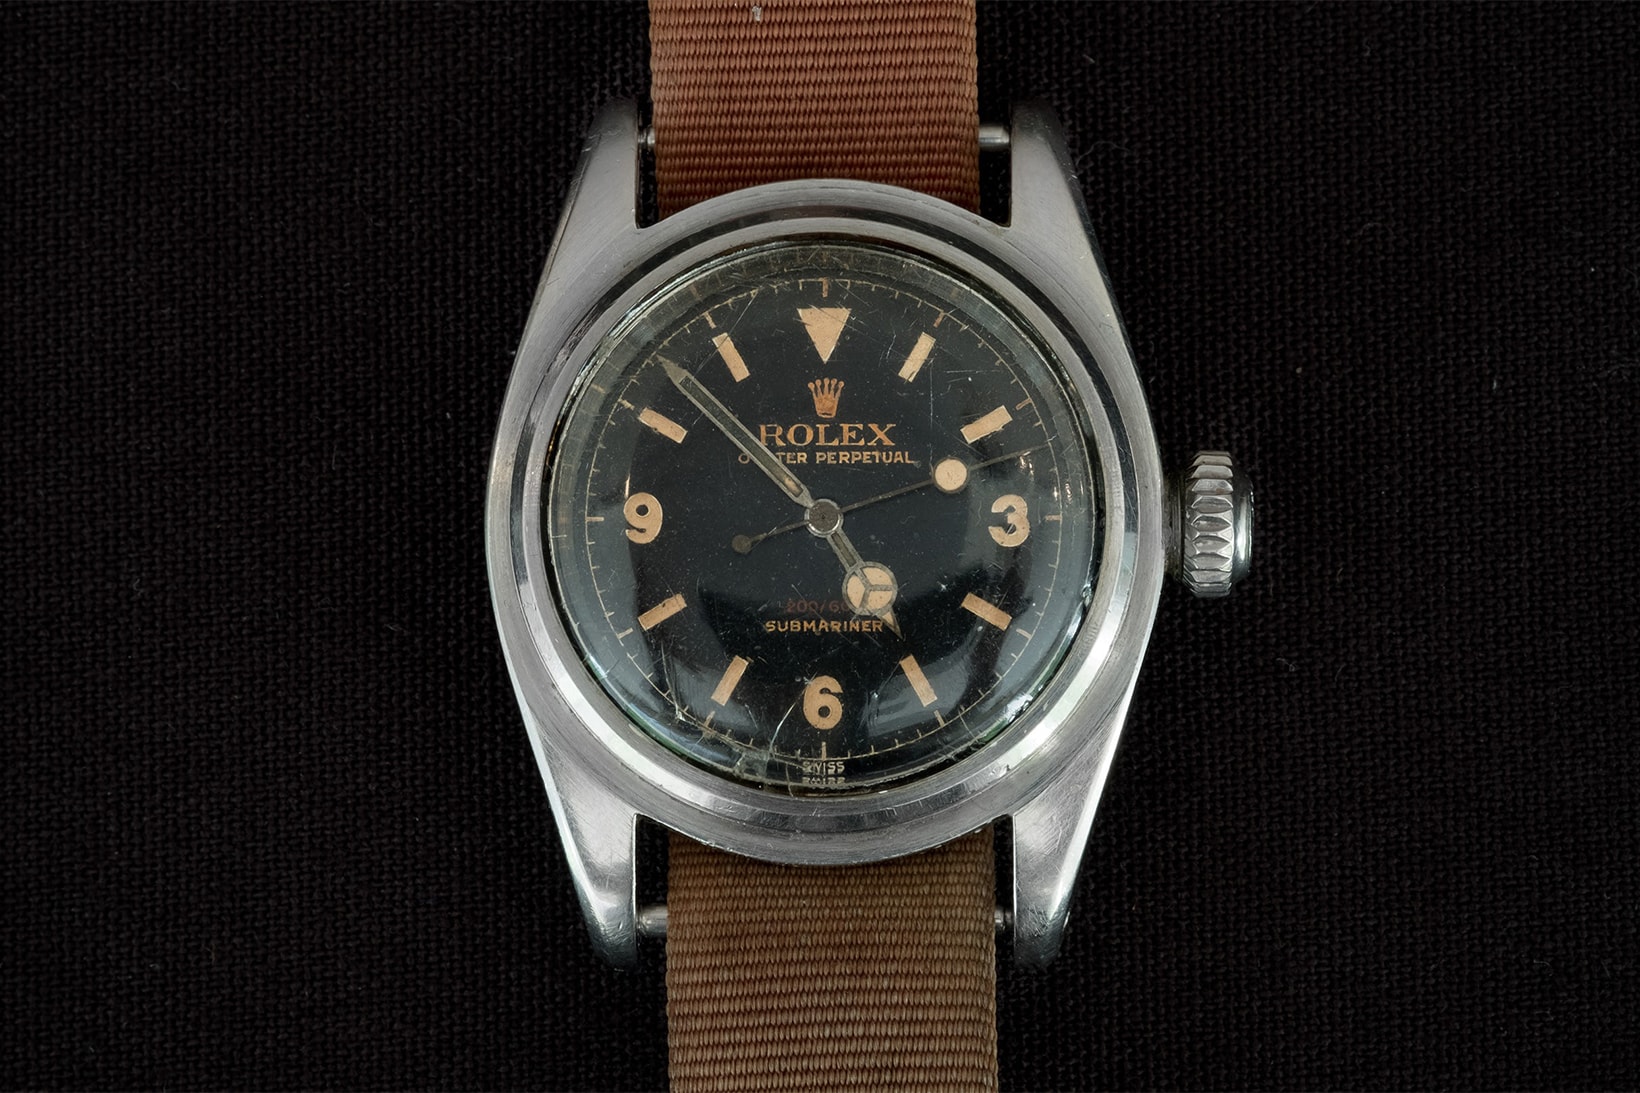 Vintage Rolex Submariner Most Expensive Watch Ever Sold 1 million usd dollars christies auction june 2018